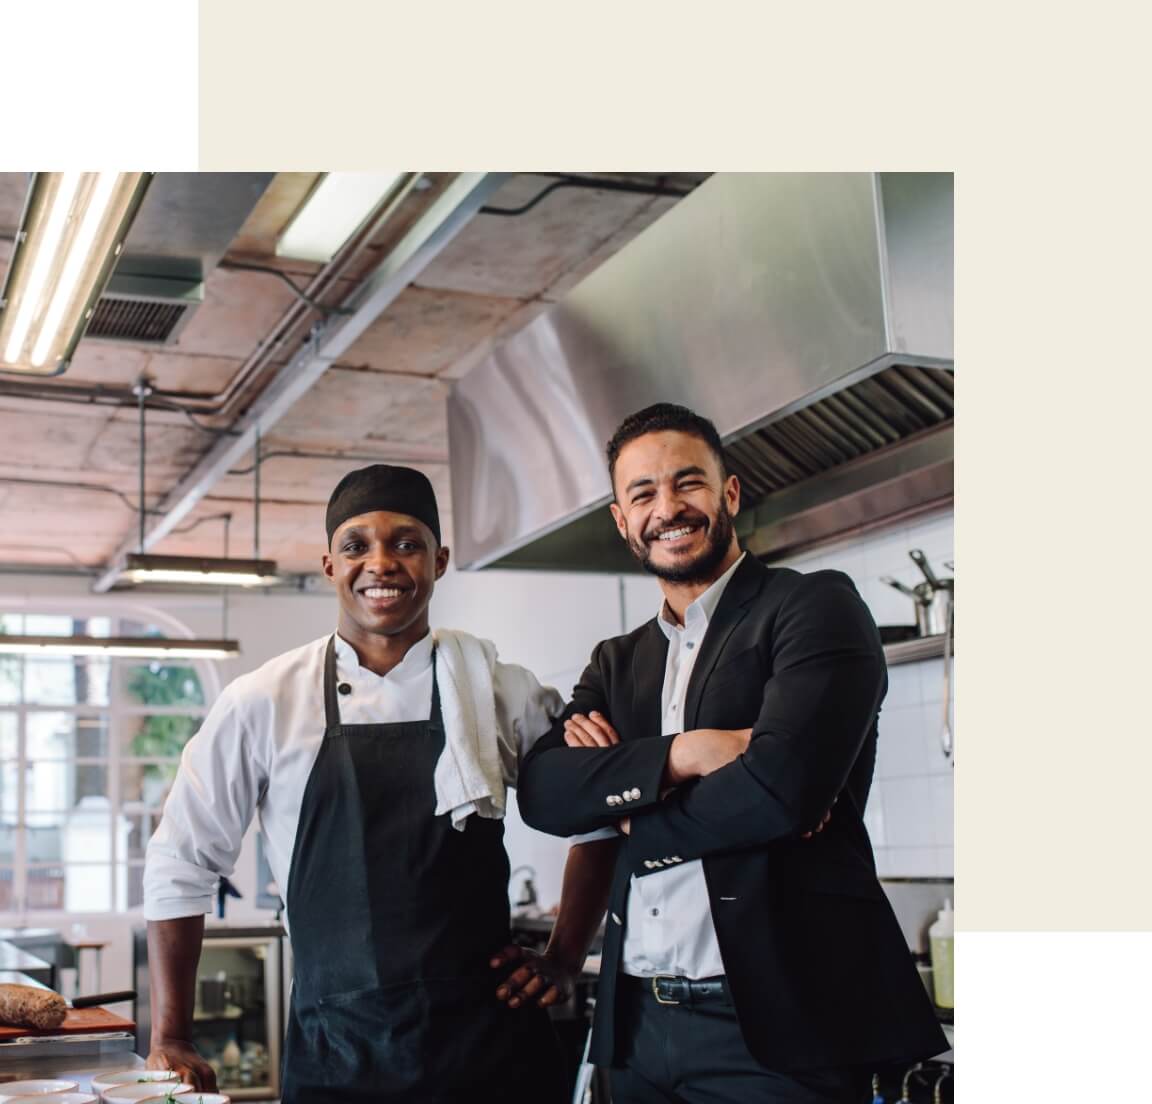 A chef and restaurant owner standing in a kitchen